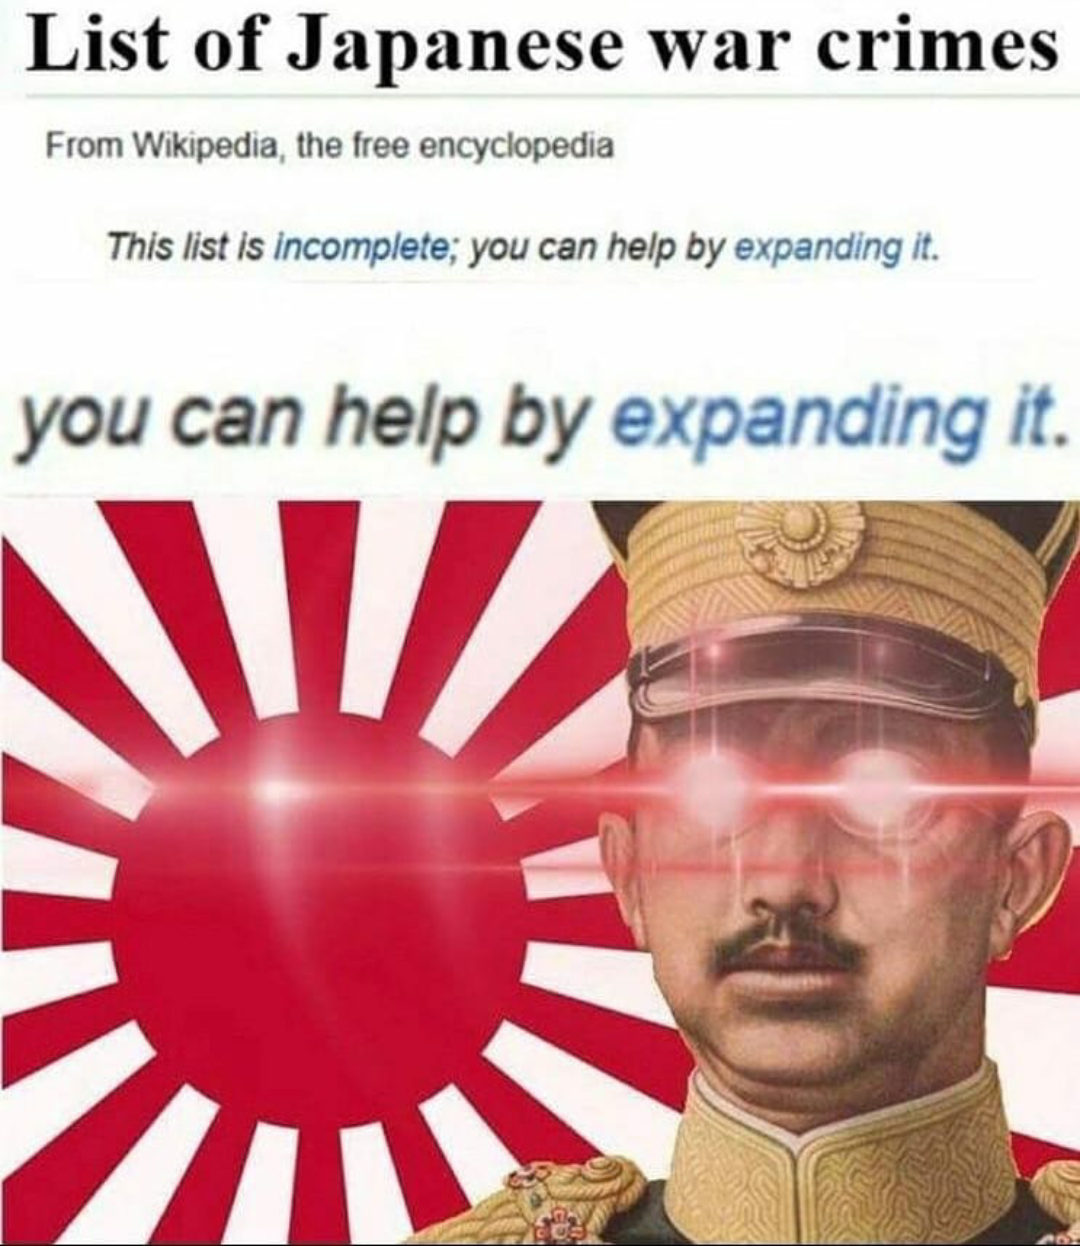 You can help by expanding it.